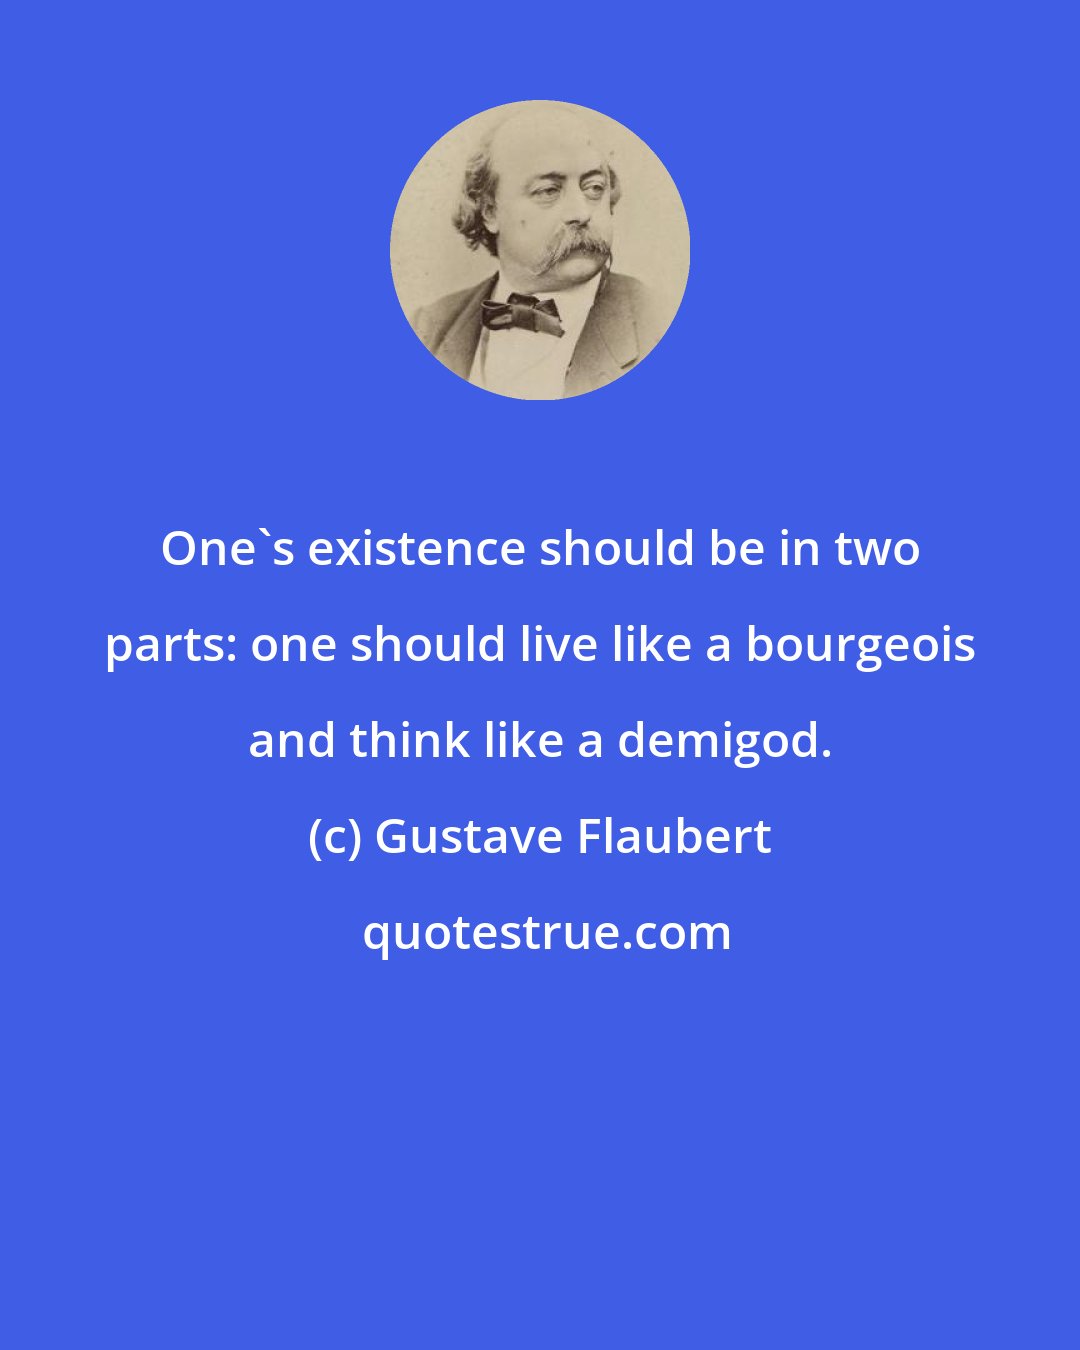 Gustave Flaubert: One's existence should be in two parts: one should live like a bourgeois and think like a demigod.